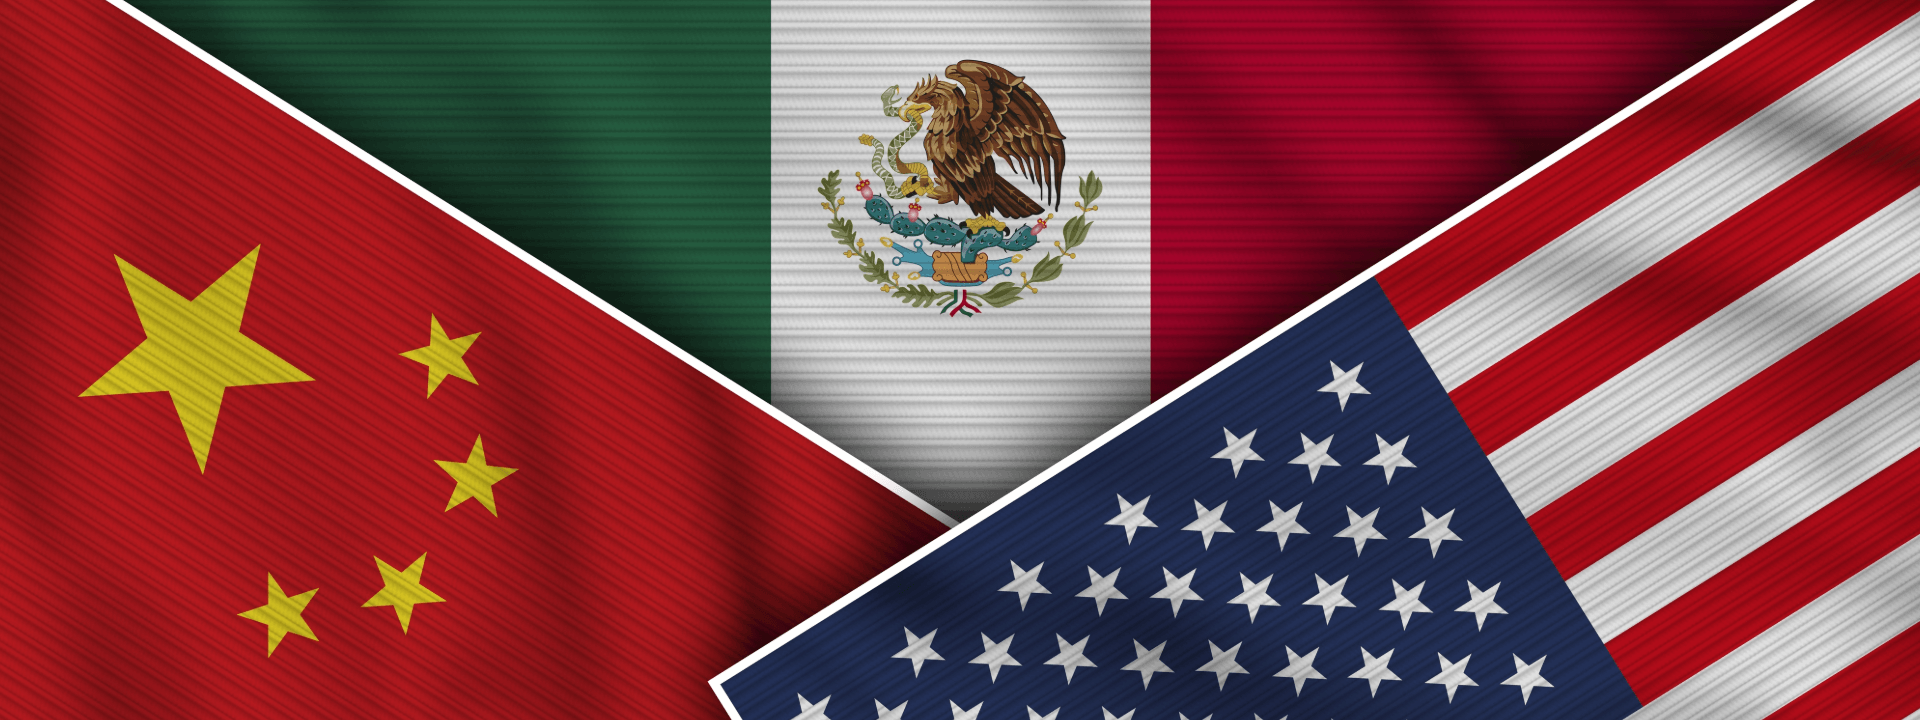 Why Is Mexico Putting Tariffs on Chinese Imports? by Juan Pablo Villasmíl and Joseph Bouchard